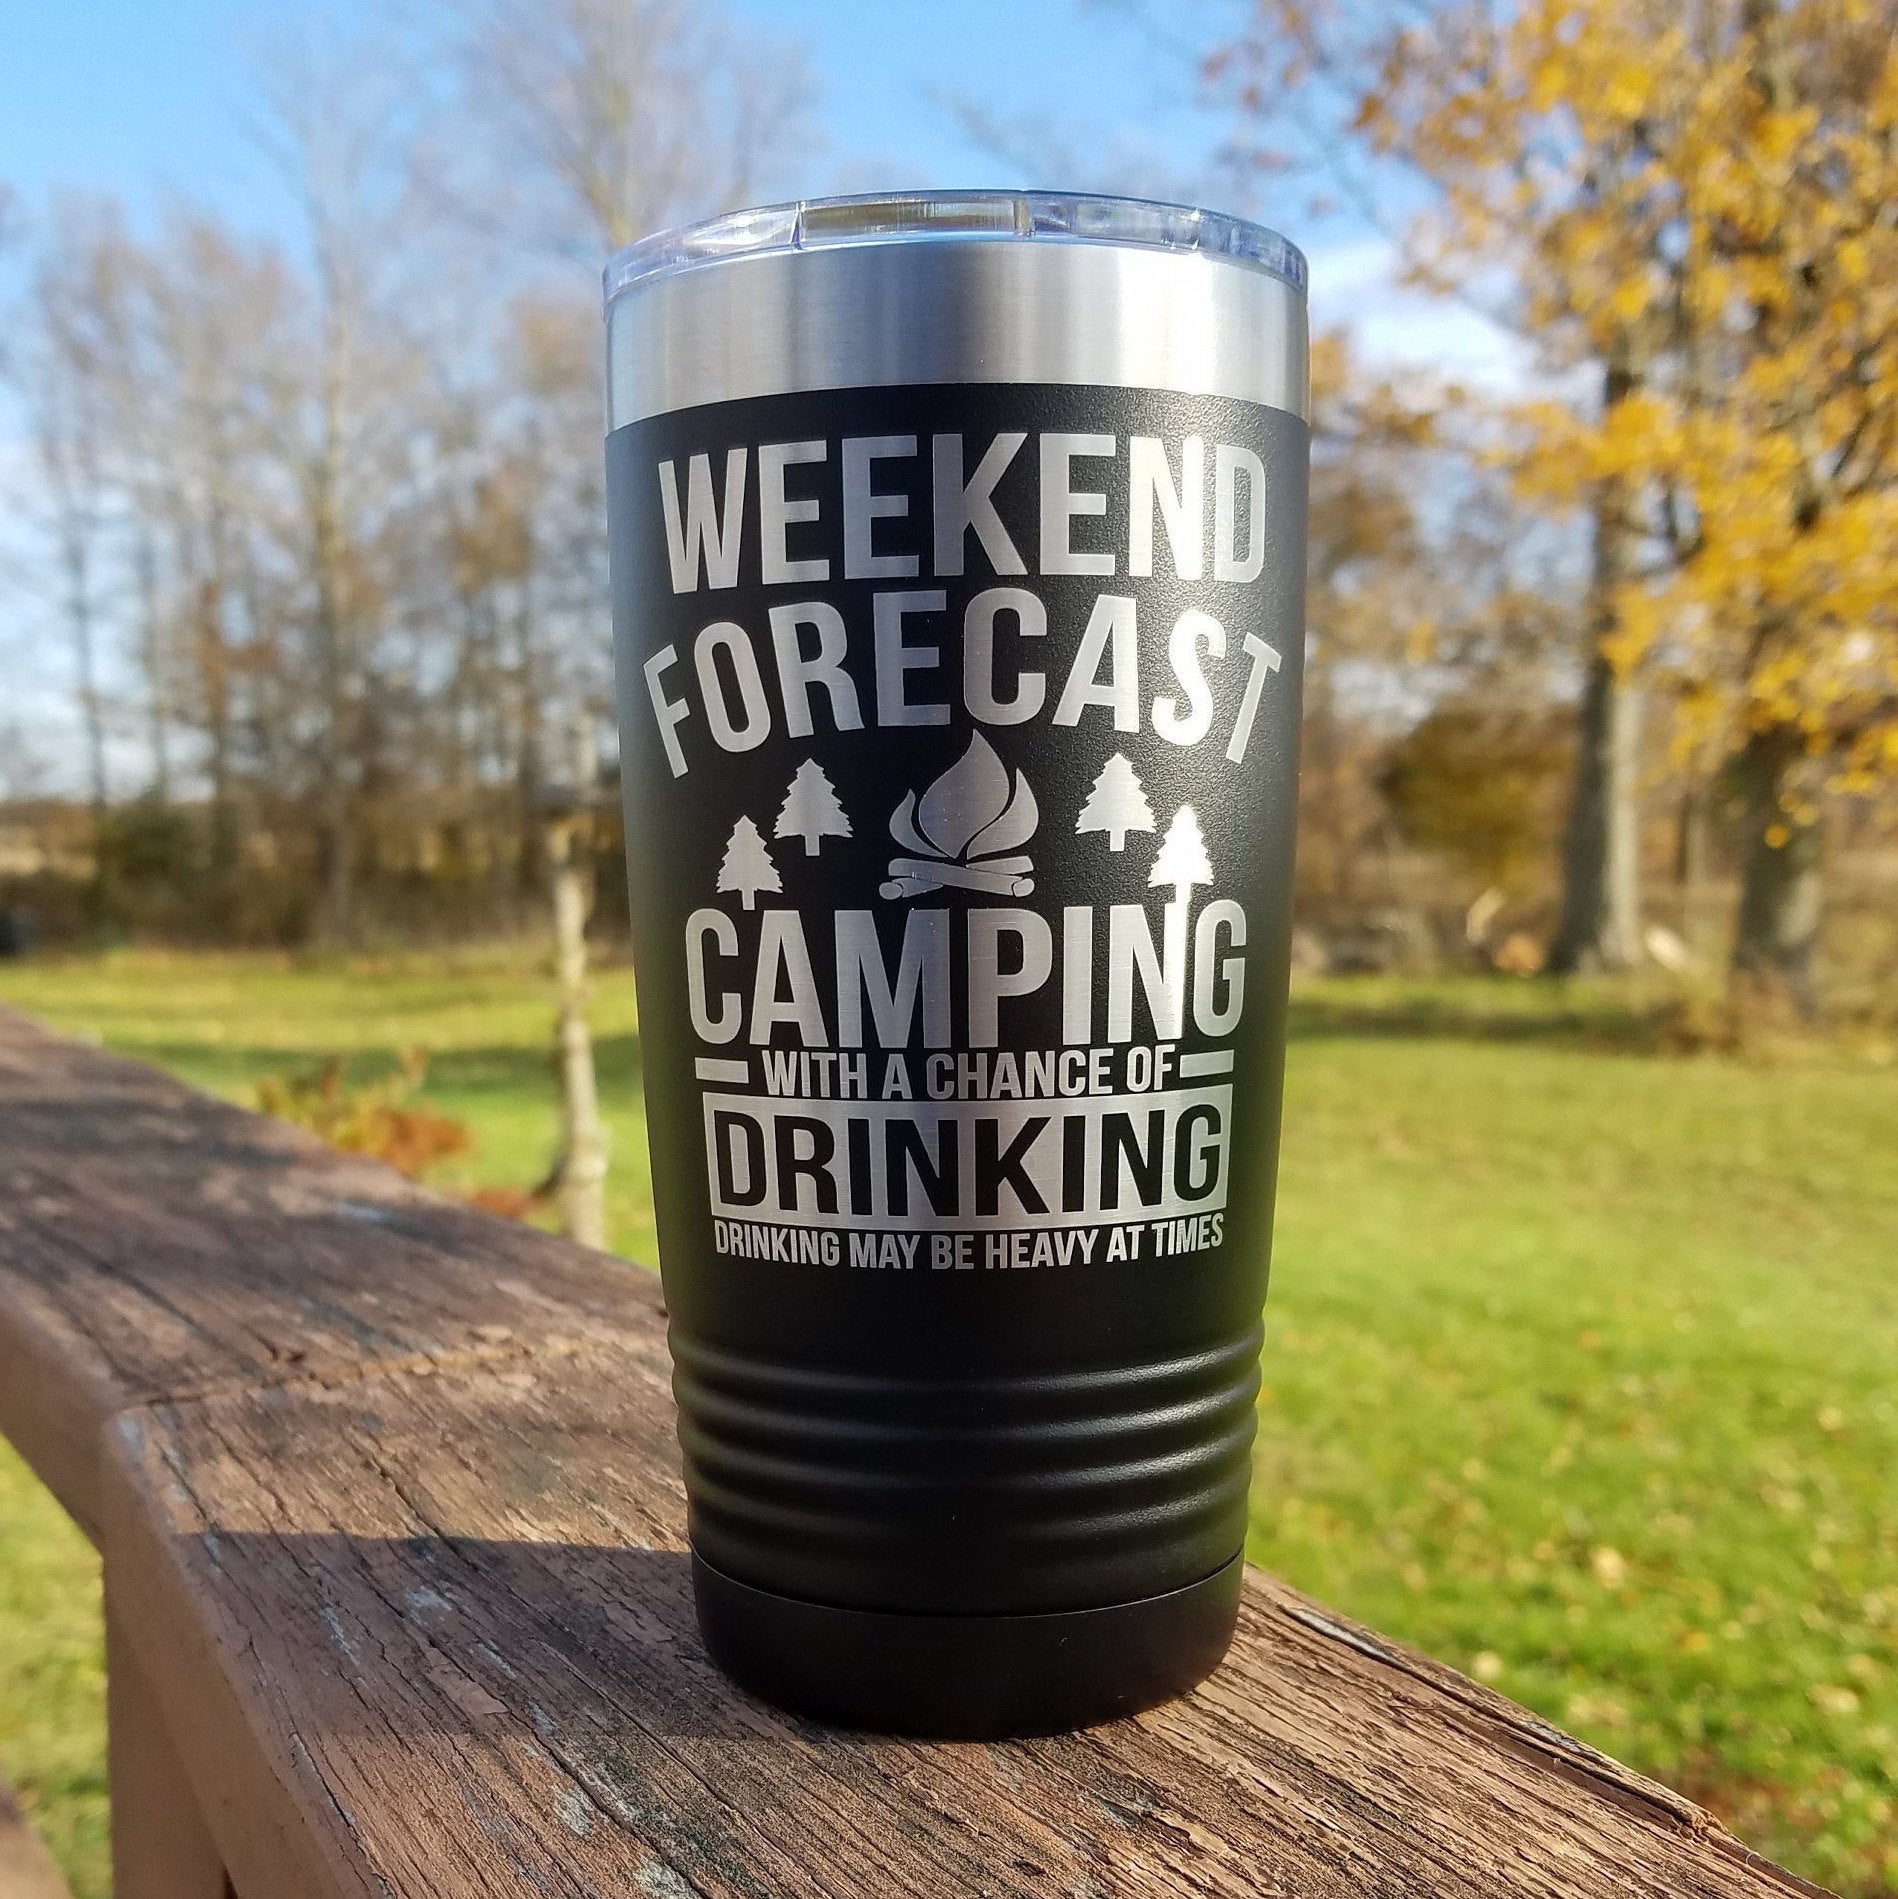 https://3cetching.com/wp-content/uploads/2020/09/weekend-forecast-camping-with-heavy-drinking-engraved-stainless-steel-tumbler-yeti-style-cup-camping-gift-5f5fc48b.jpg